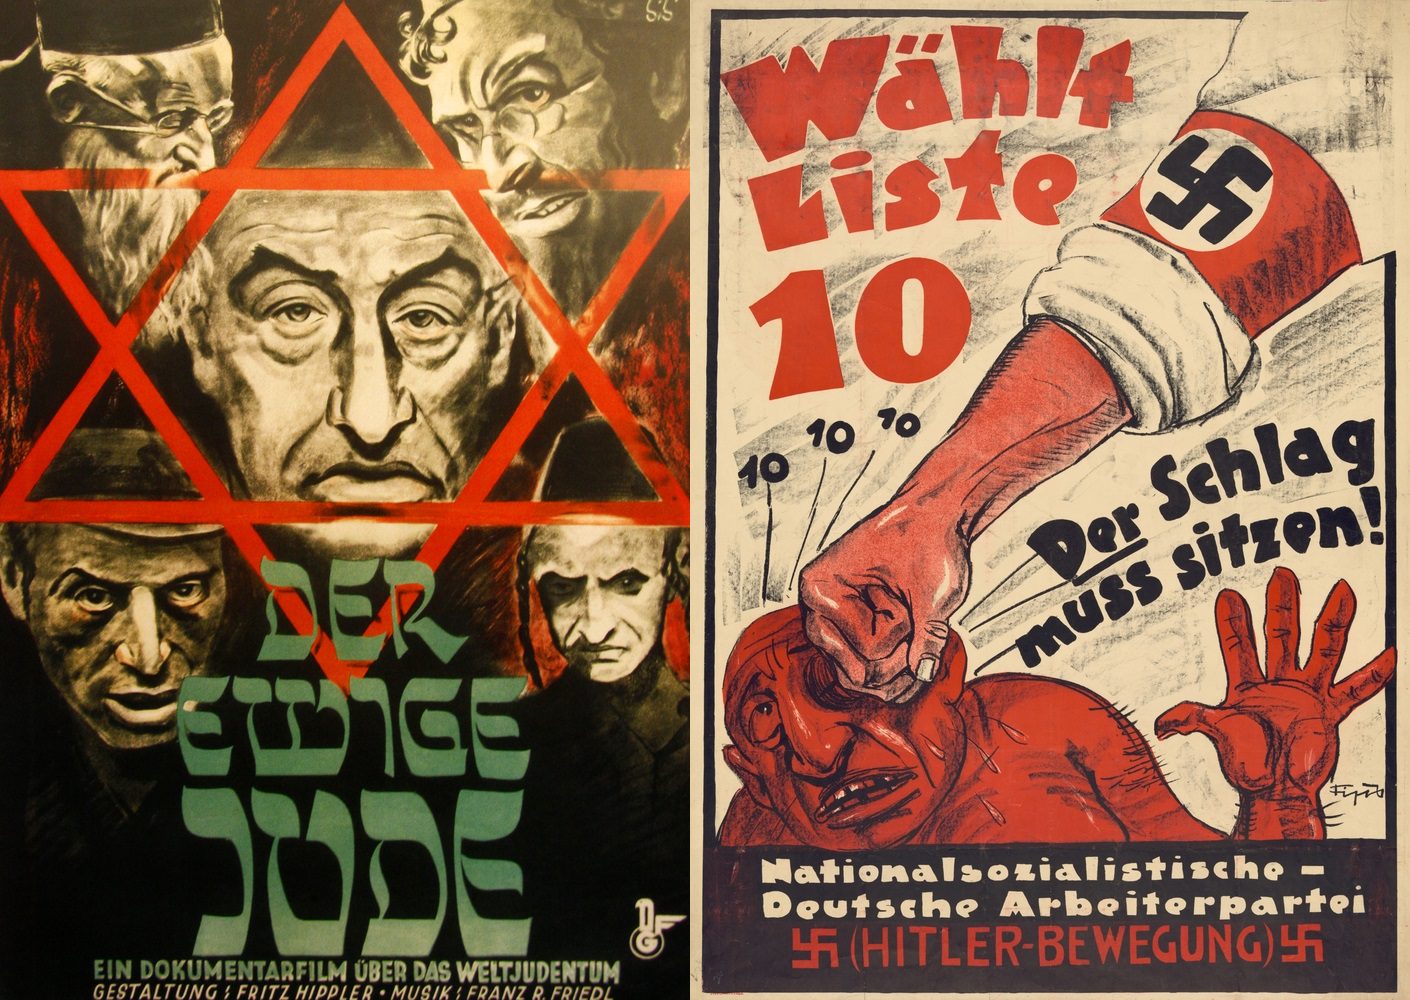 Two pieces of anti-Sematic propaganda created by the Nazis. 